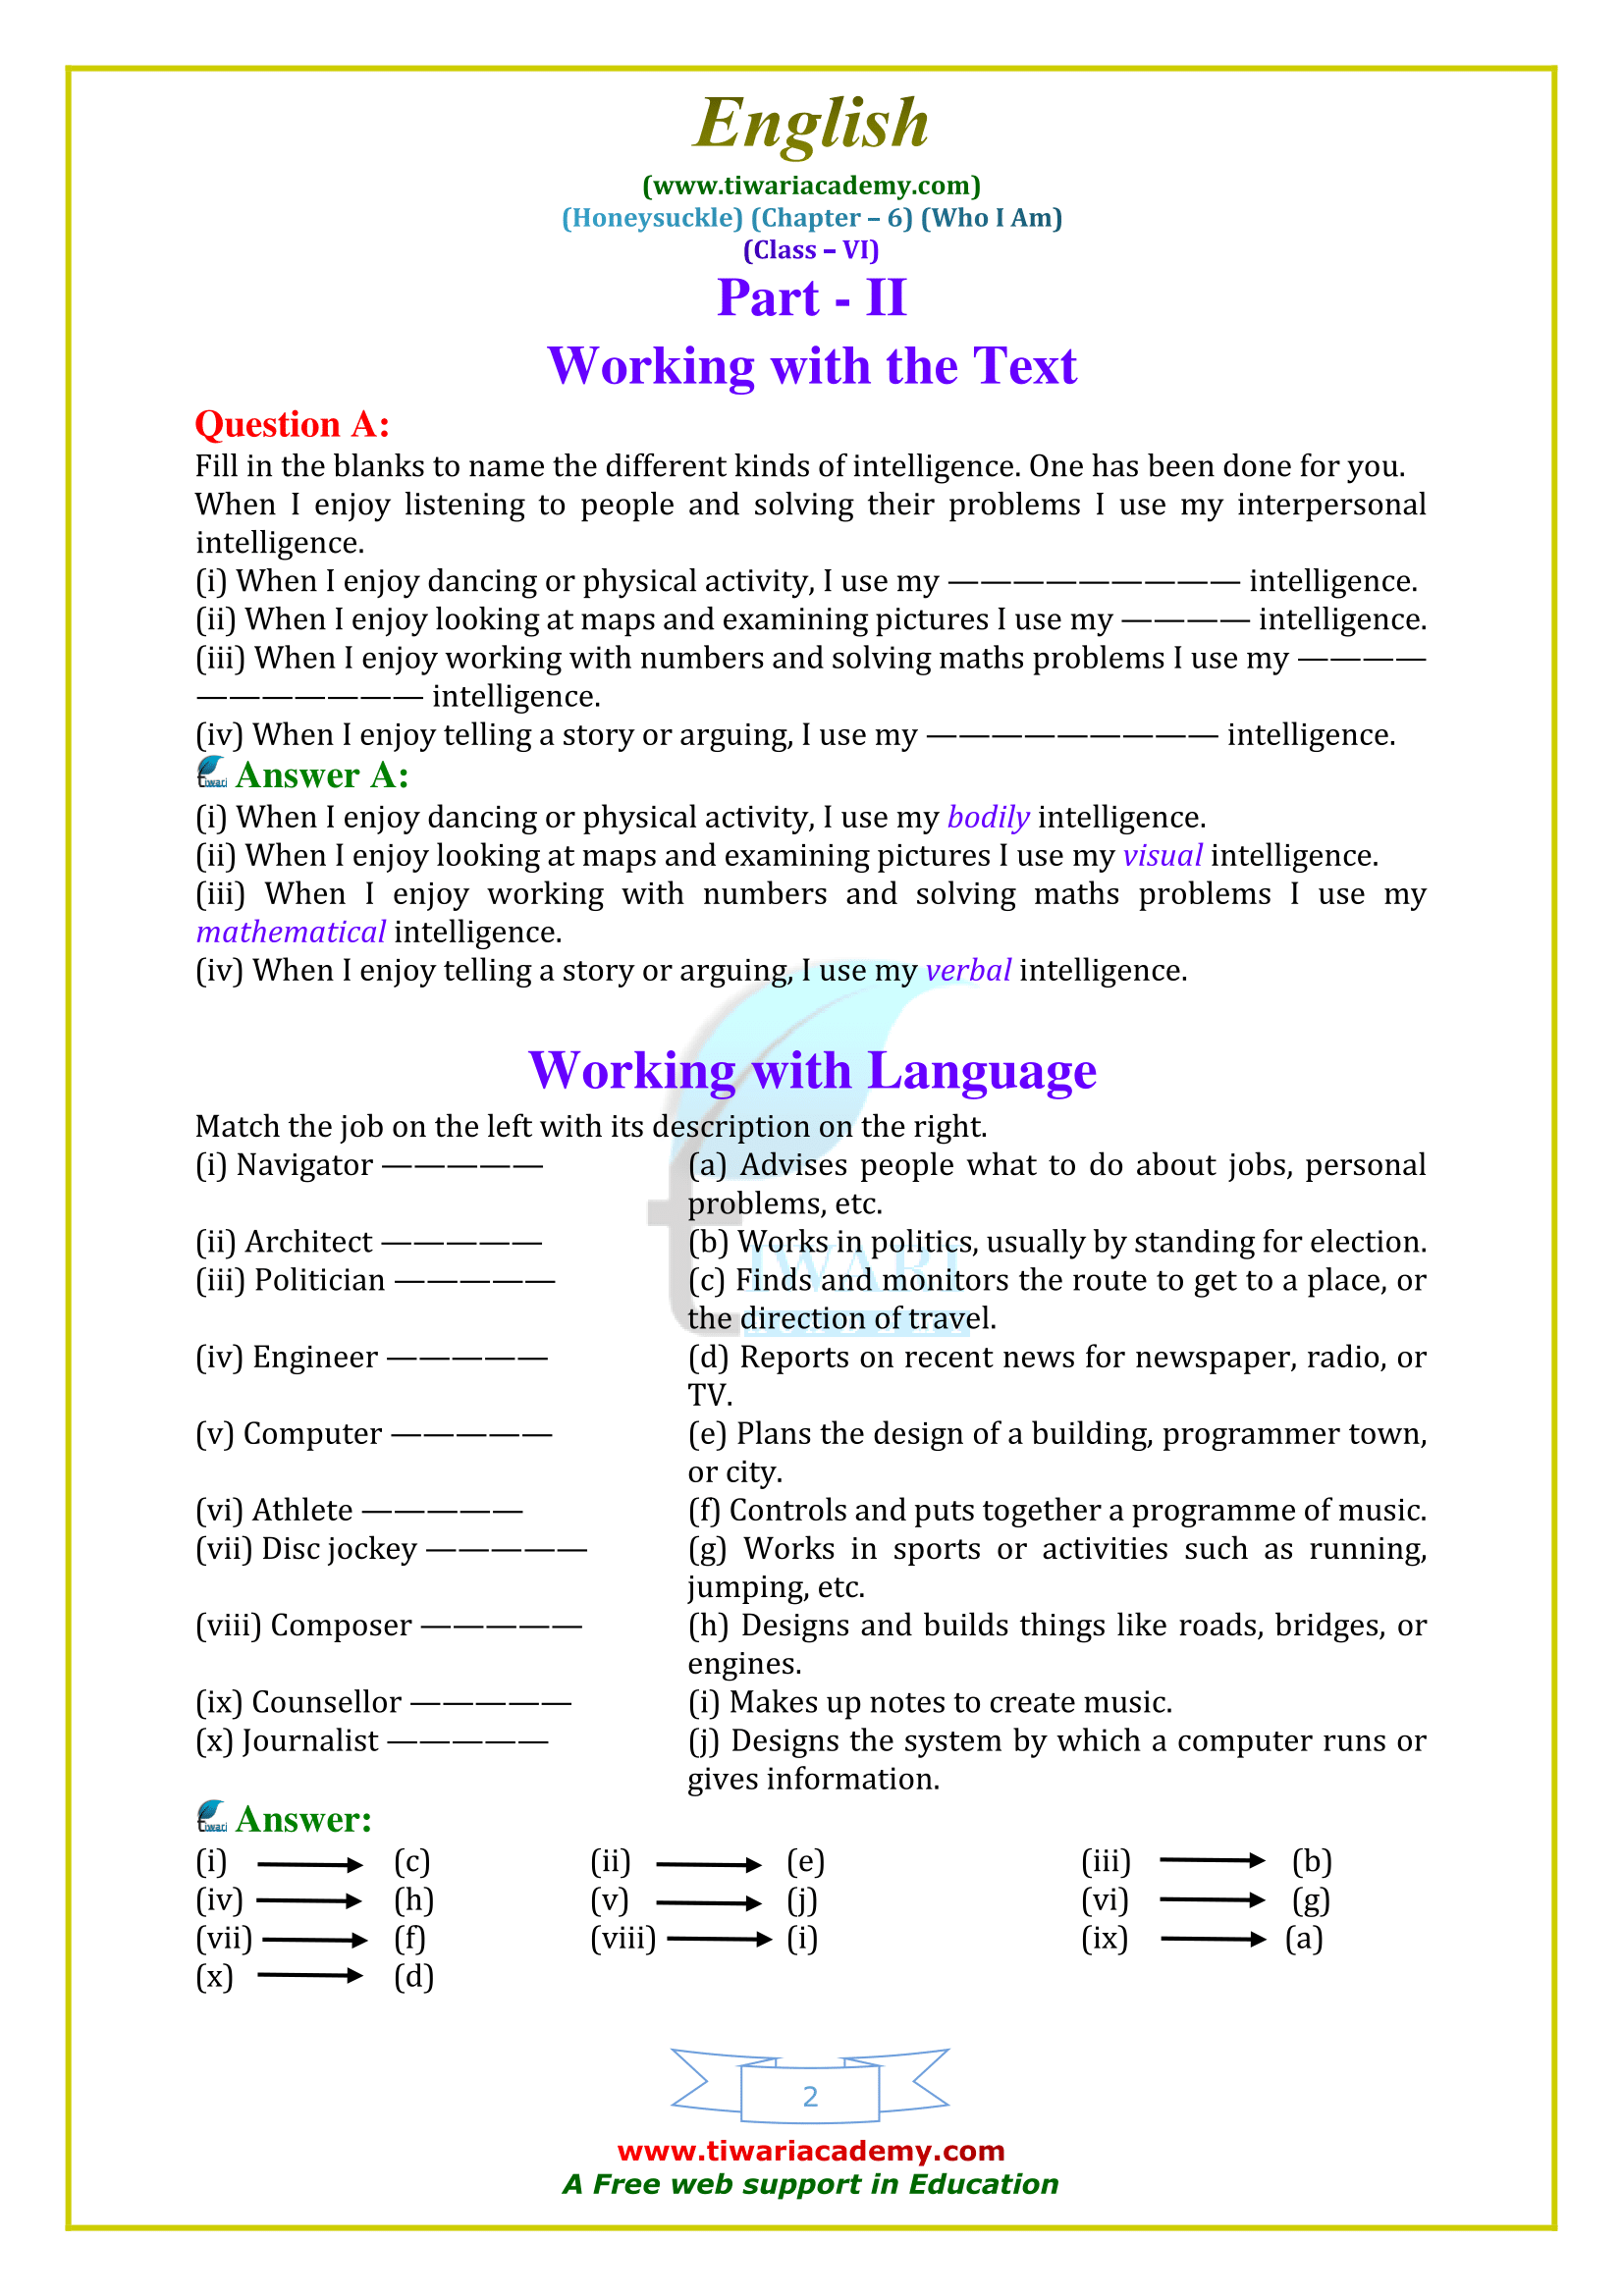 NCERT Solutions for Class 6 English Honeysuckle Chapter 6 in PDF form